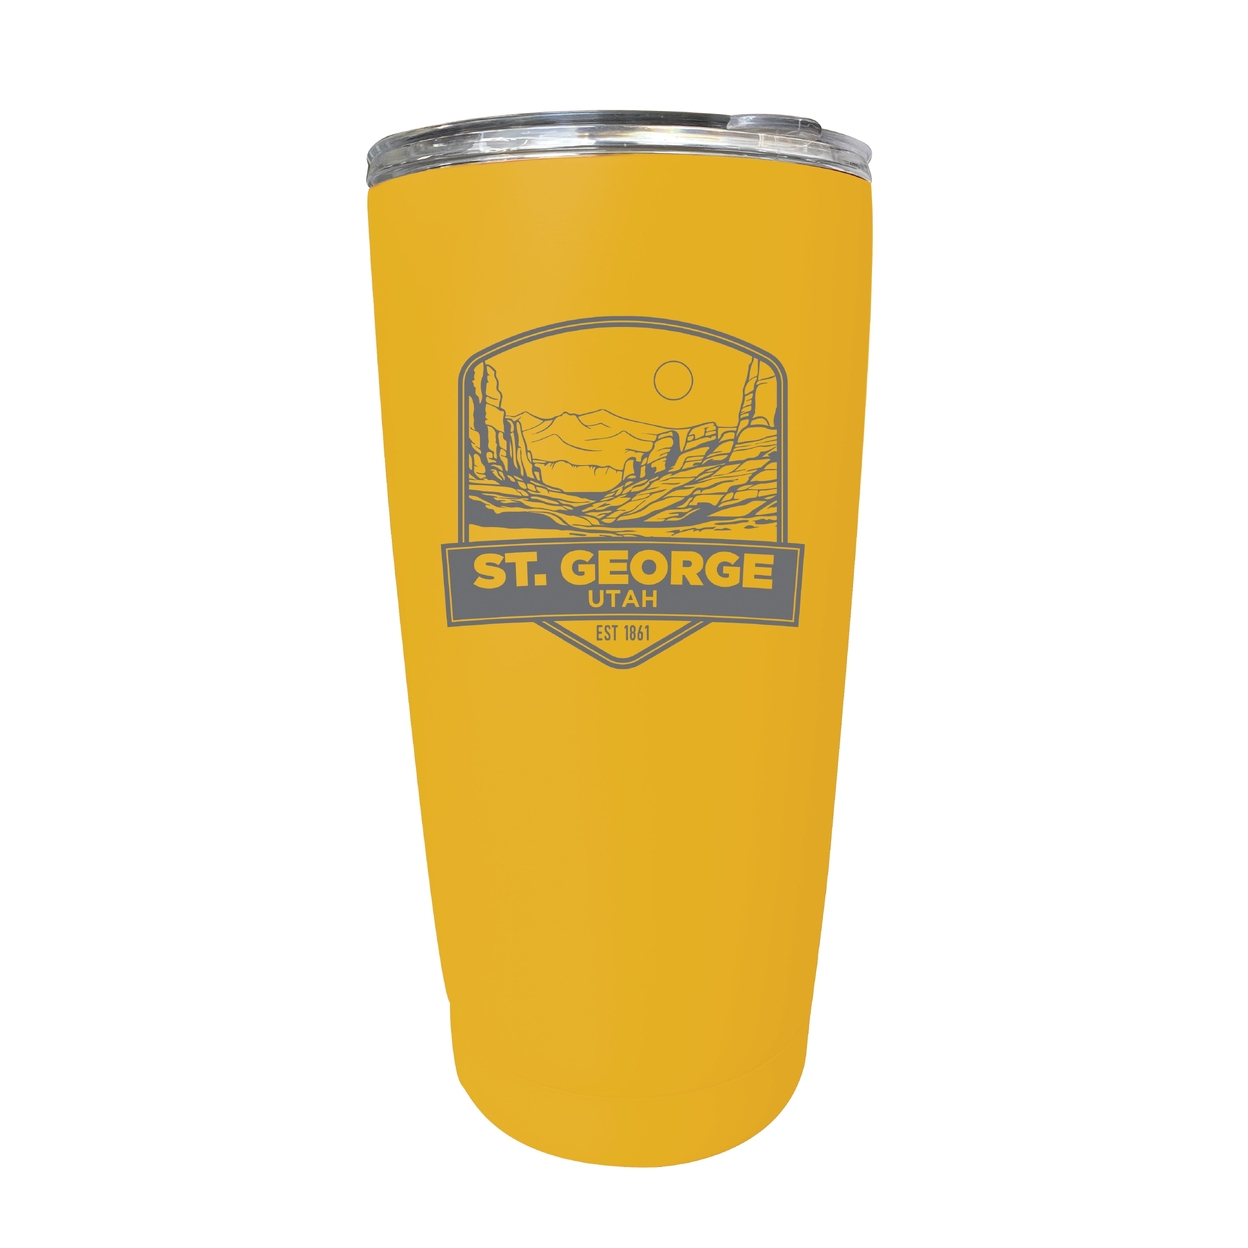 St. George Utah Souvenir 16 Oz Engraved Stainless Steel Insulated Tumbler - Yellow,,4-Pack